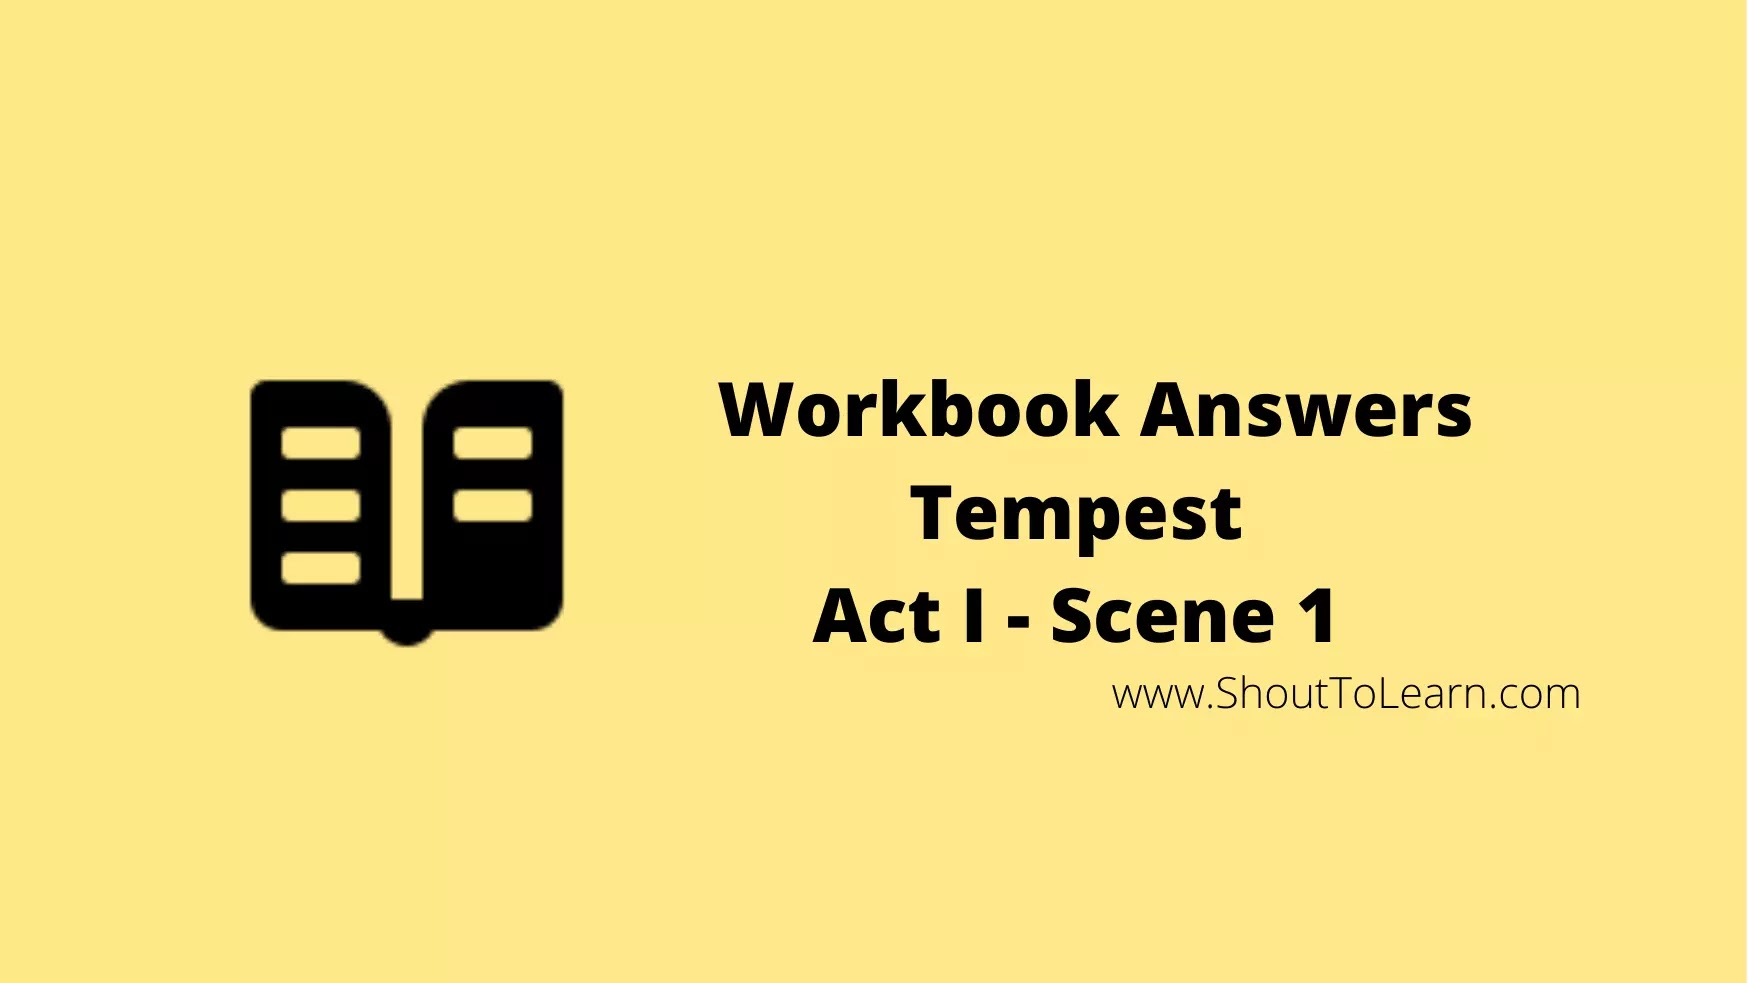 Workbook Answers of Tempest Act 1 Scene 1